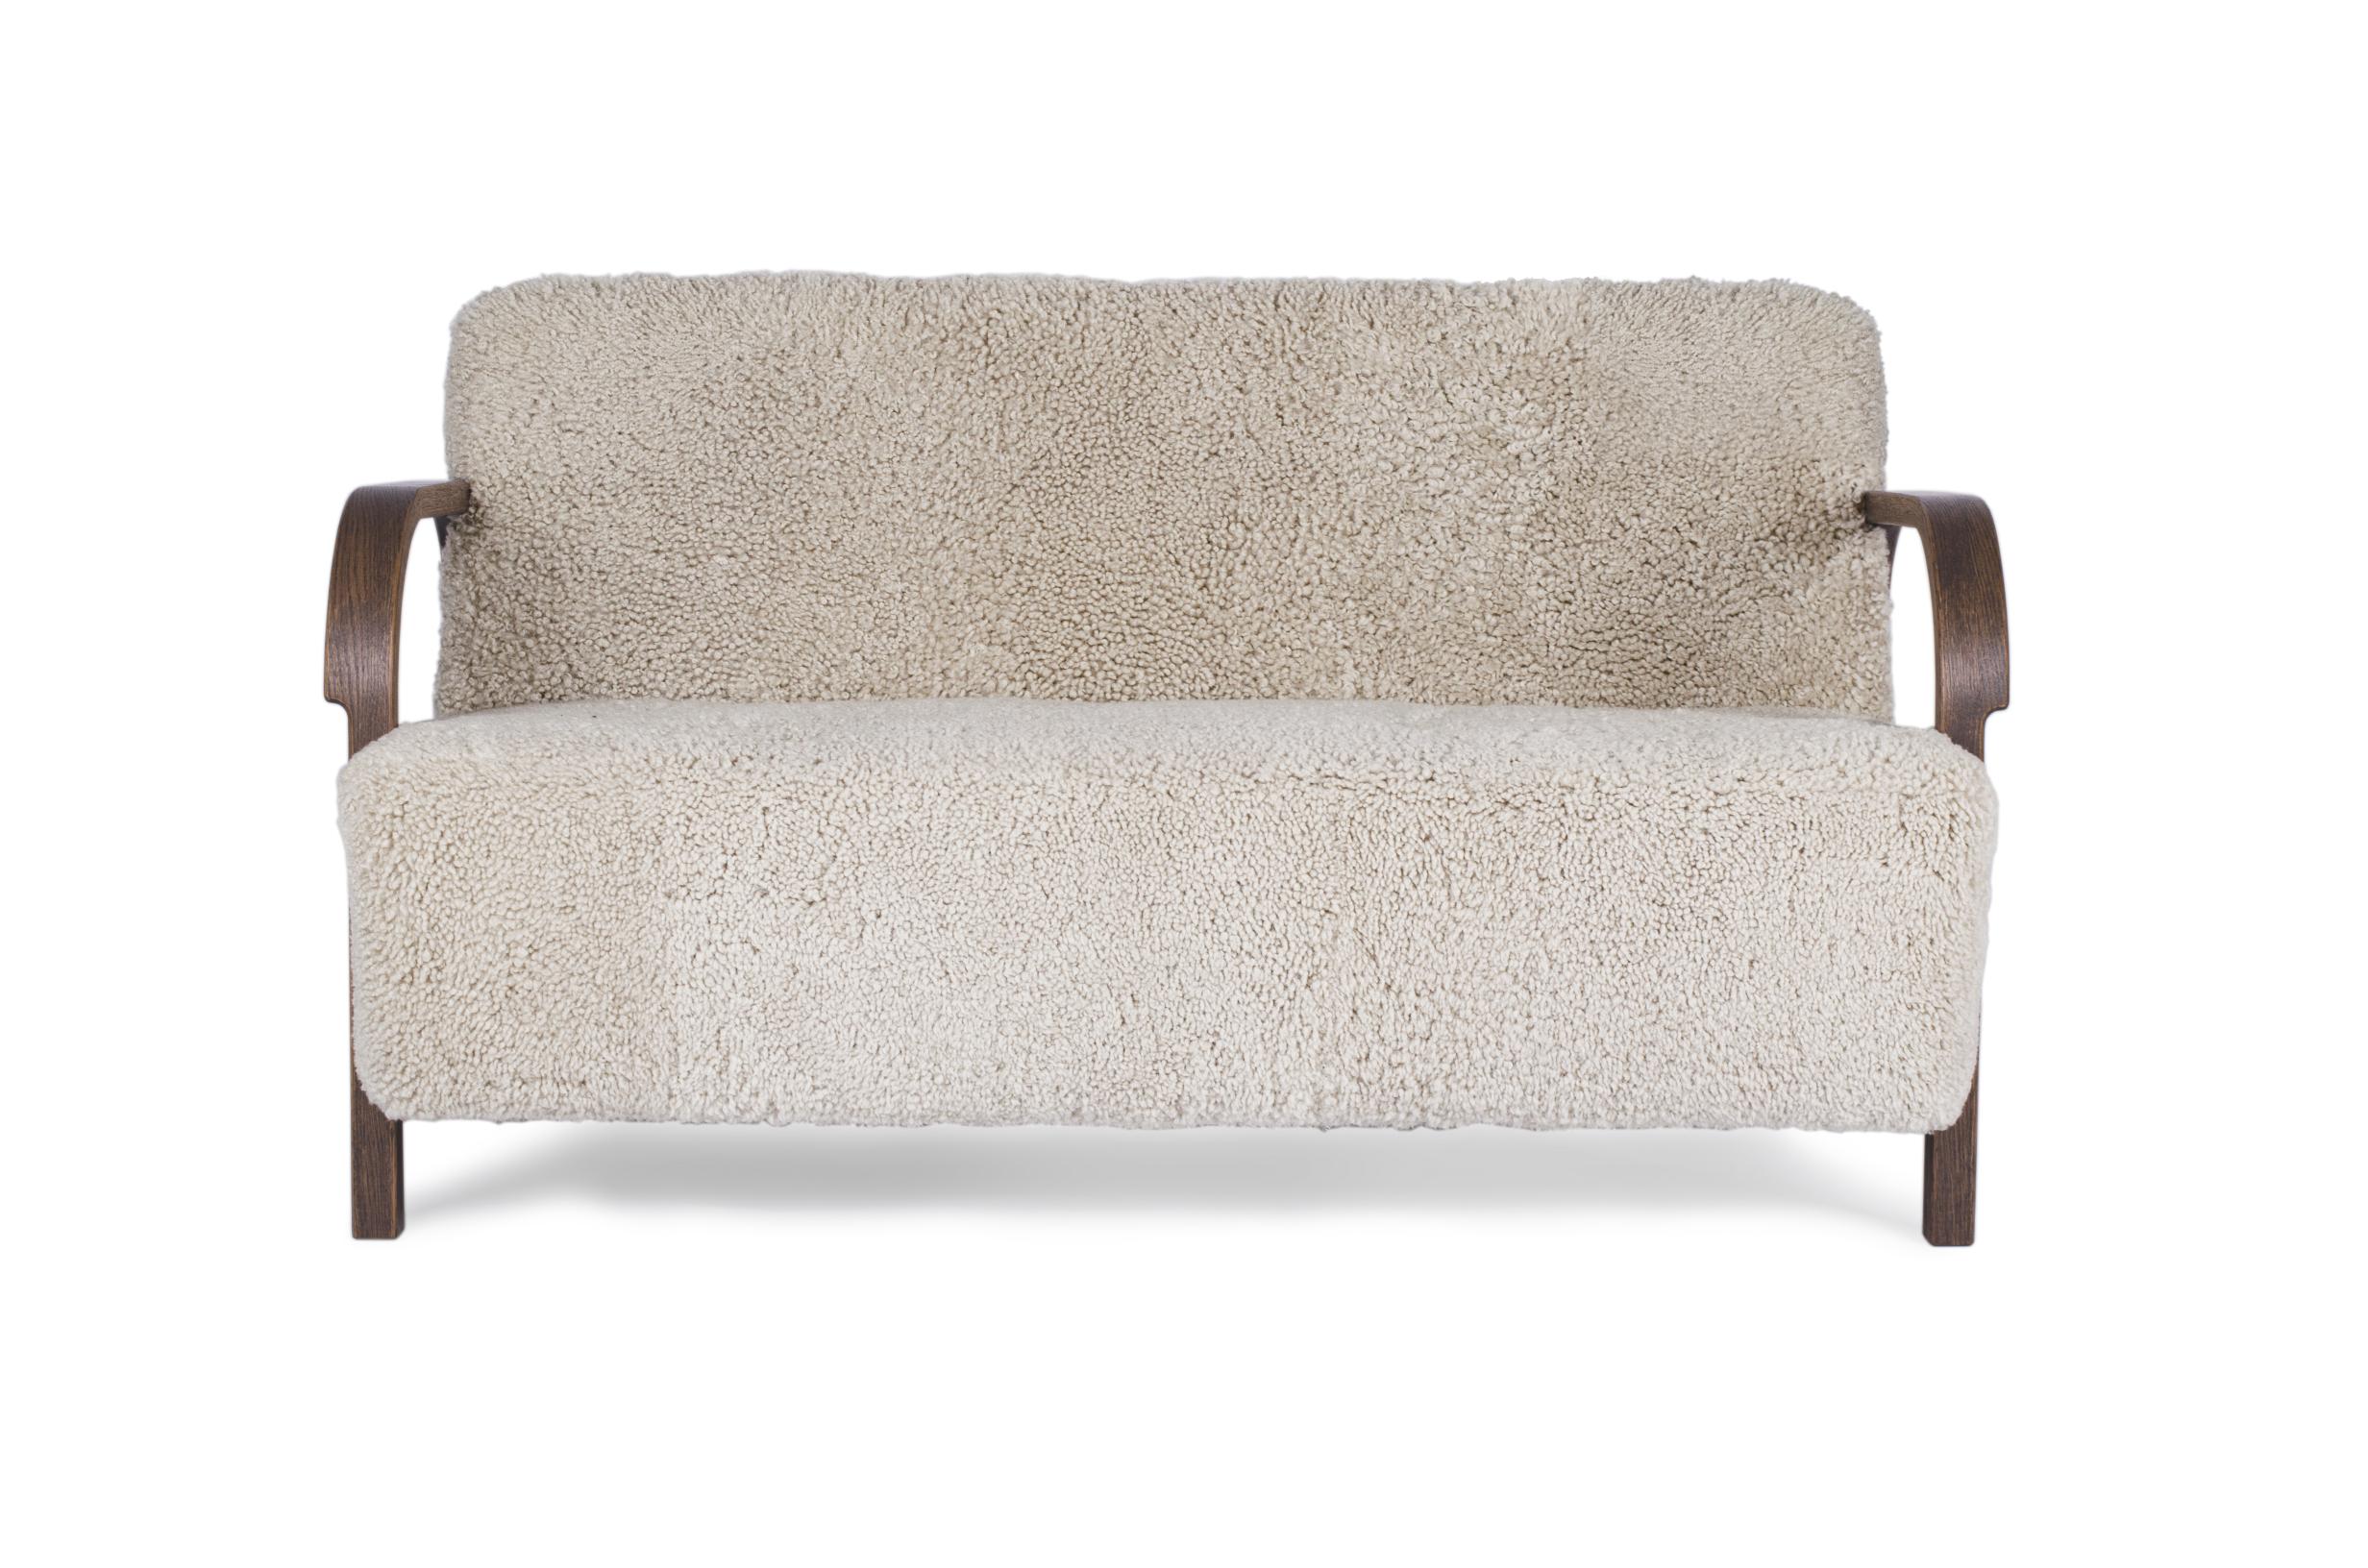 Other Moonlight Sheepskin ARCH 2 Seater Sofa by Mazo Design For Sale